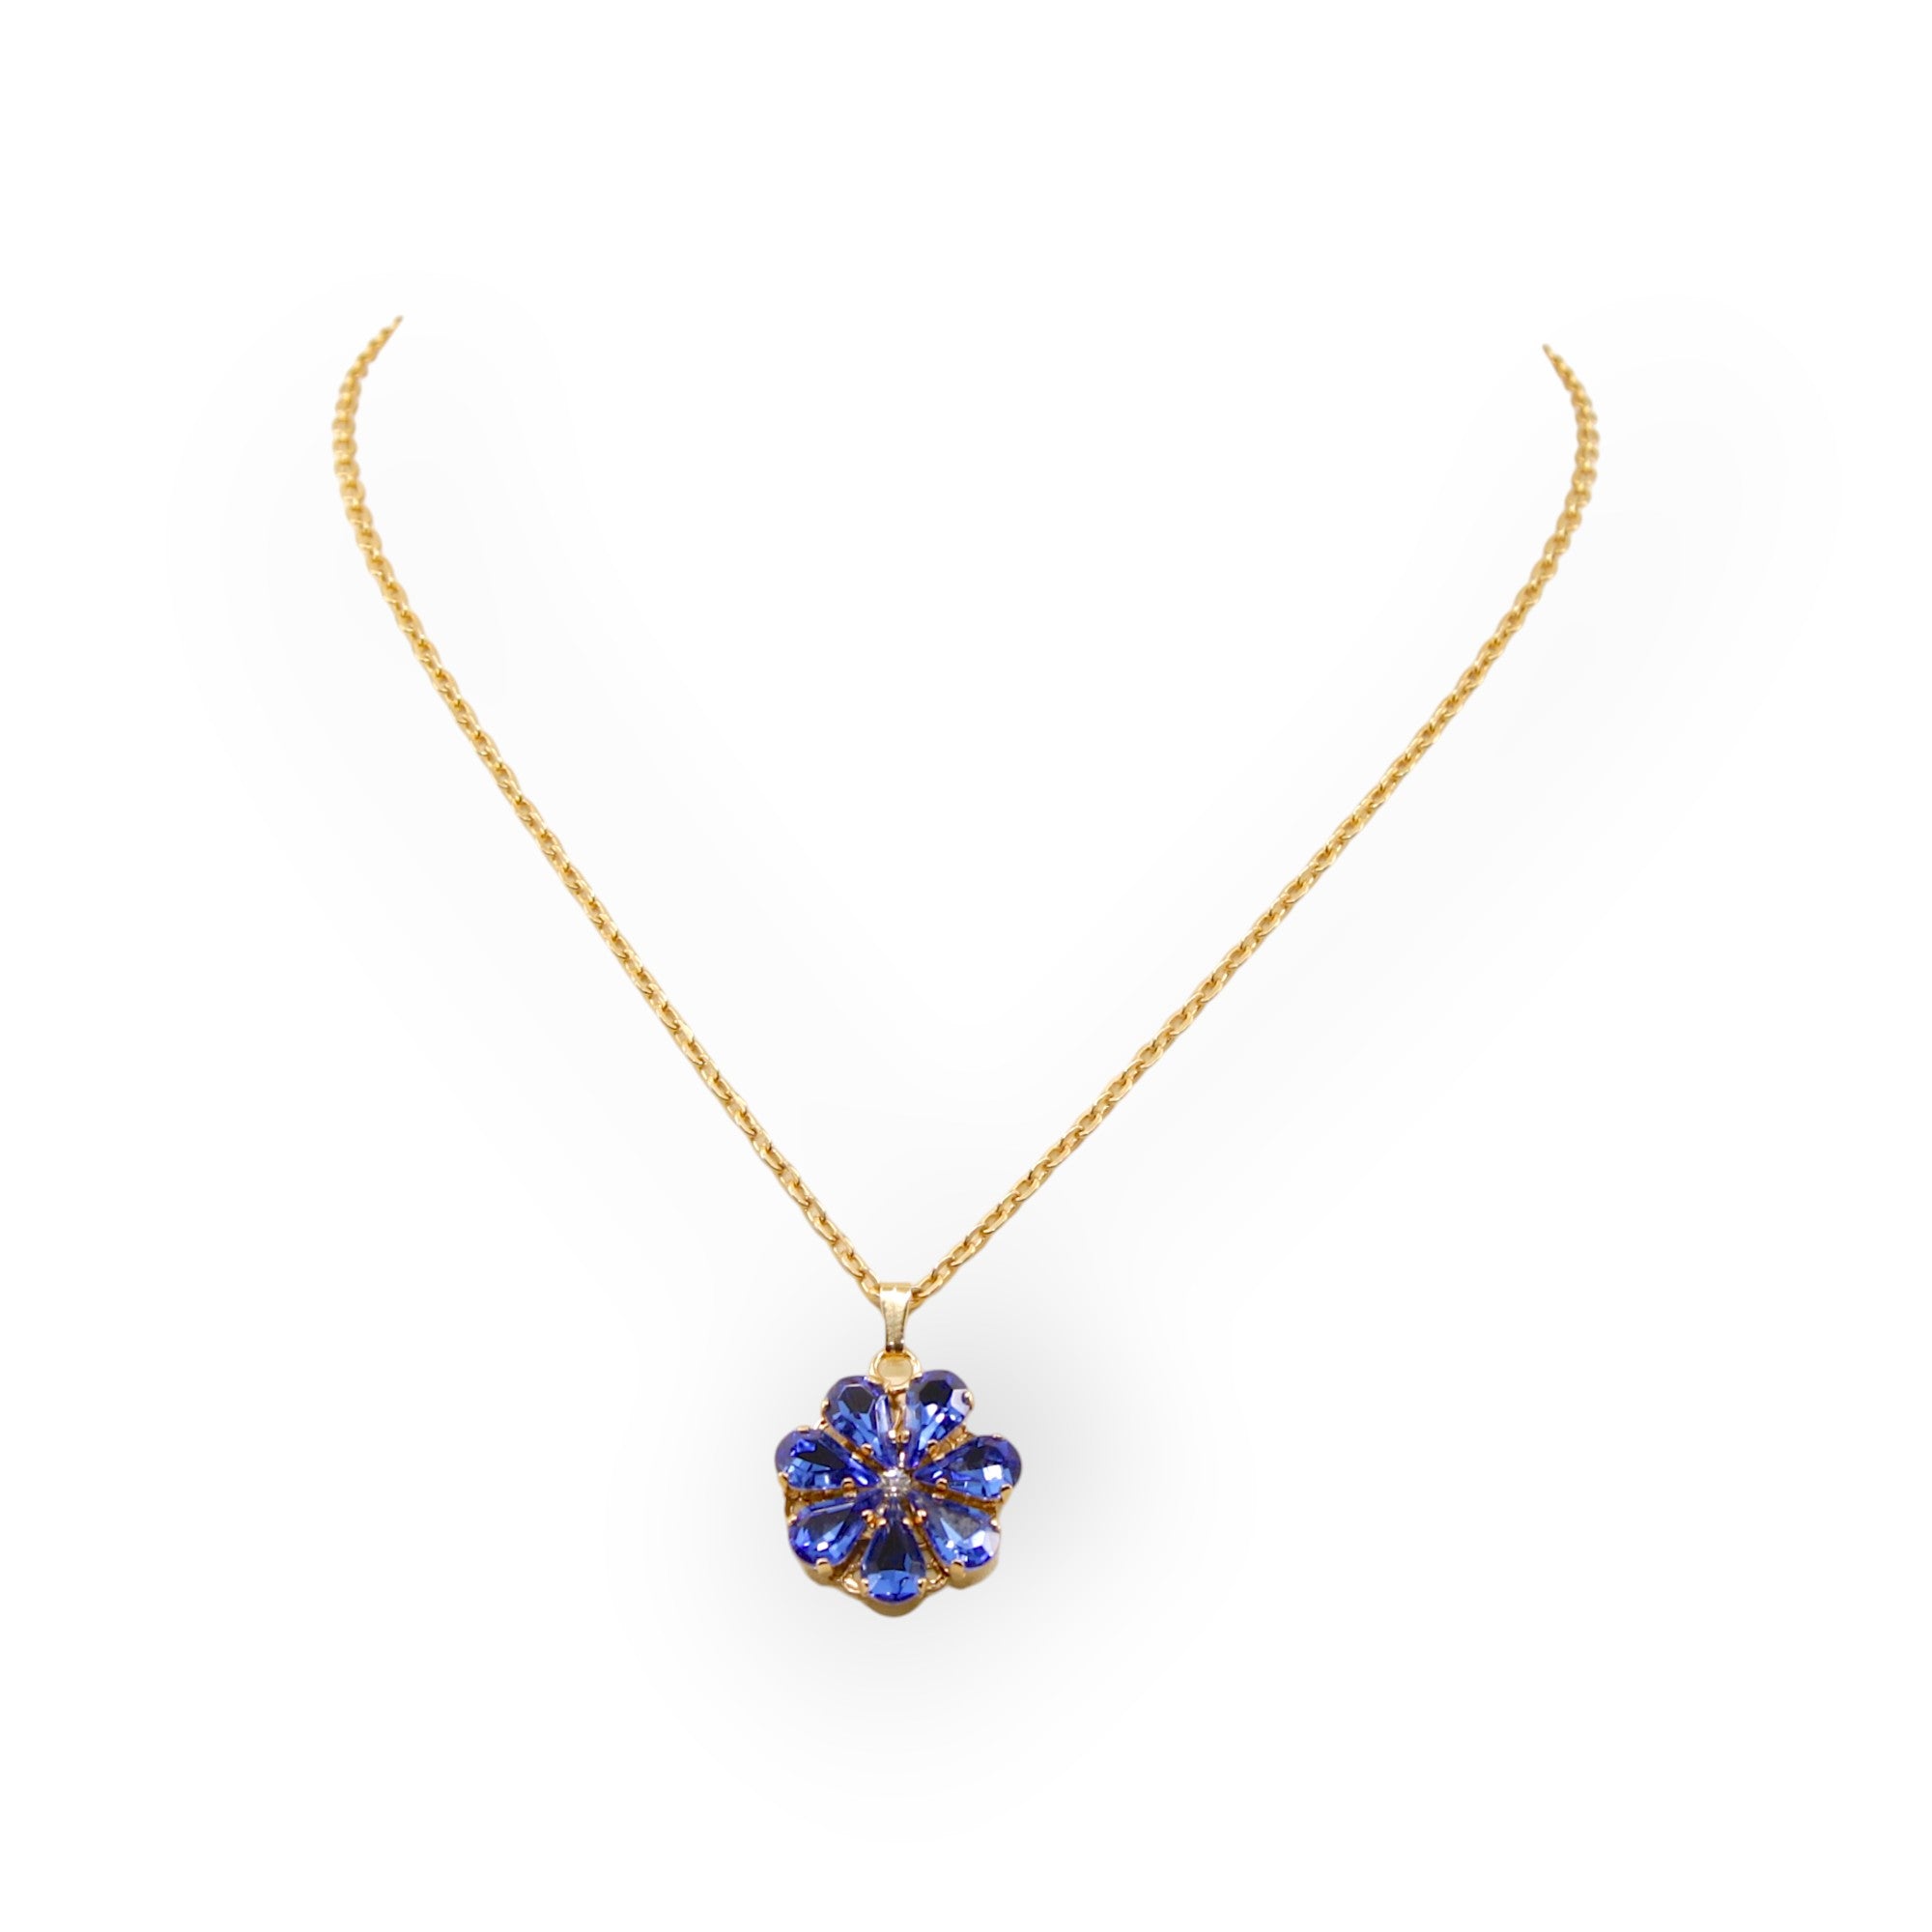 Daisy Pendant Necklace With Crystal Drops In sapphire and aquamarine Shades.